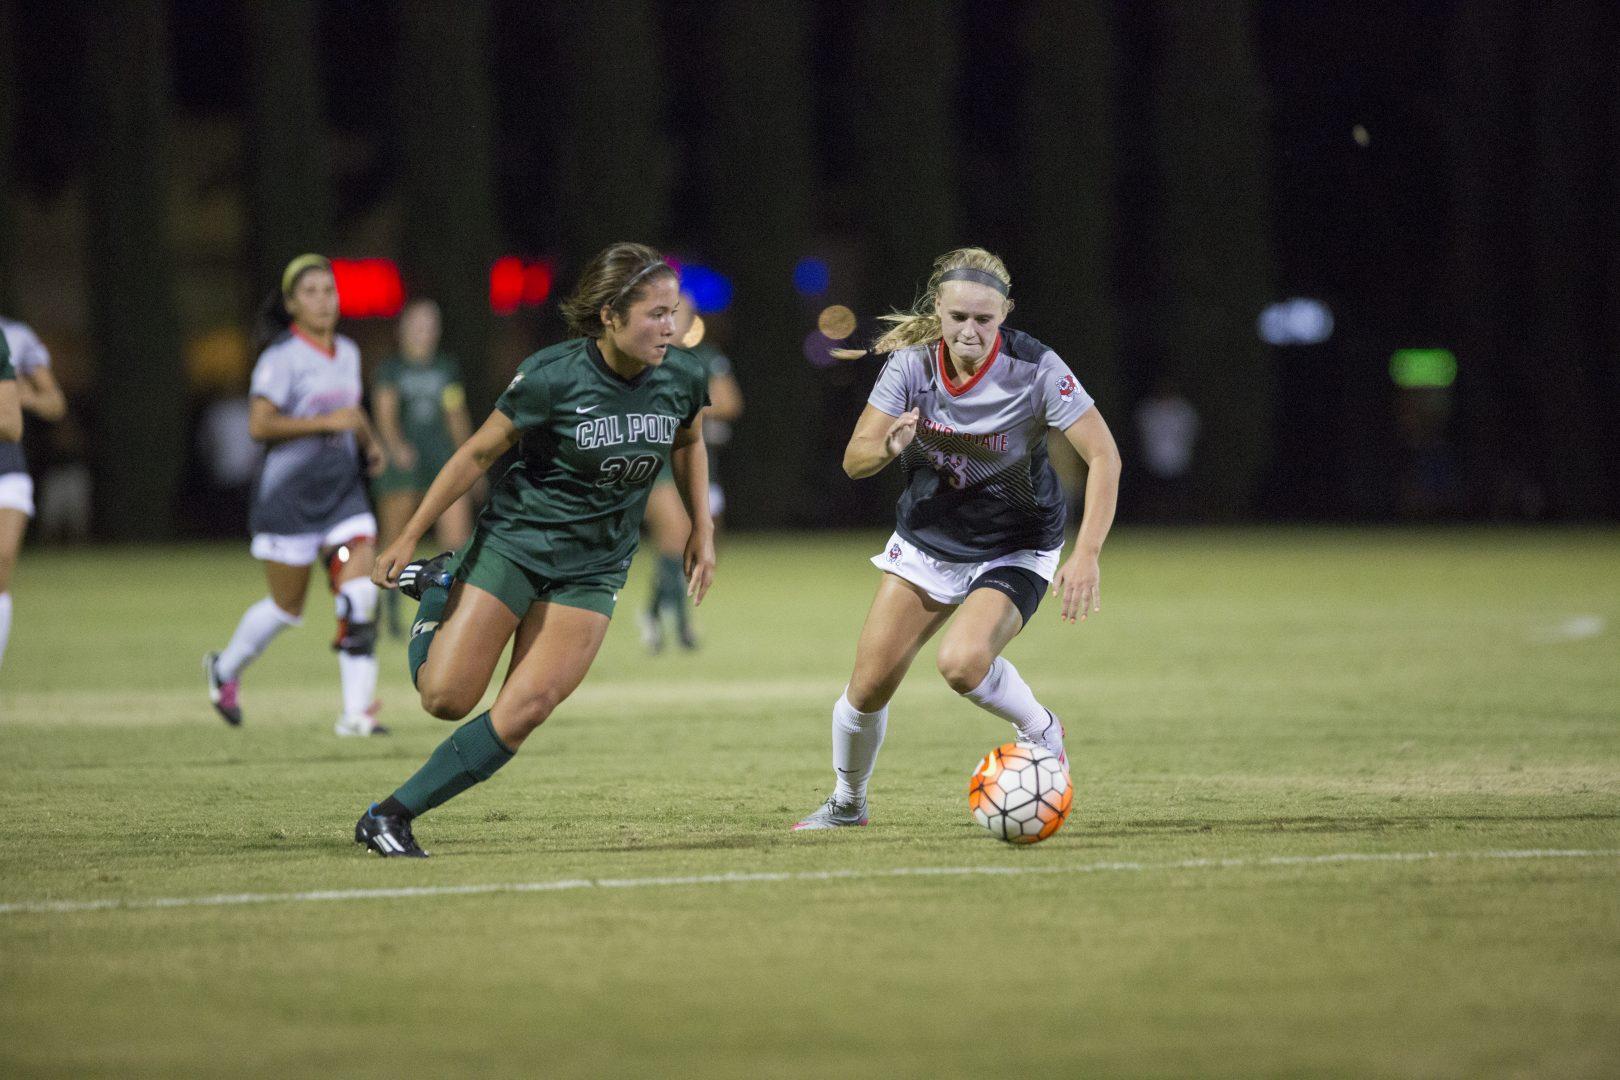 Fresno State sophomore Sara Jo Ciapponi engages with Cal Poly freshman forward Caitlyn Kreutz during Sunday’s nonconference match at the Soccer and Lacrosse Field. (Khone Saysamongdy/The Collegian)